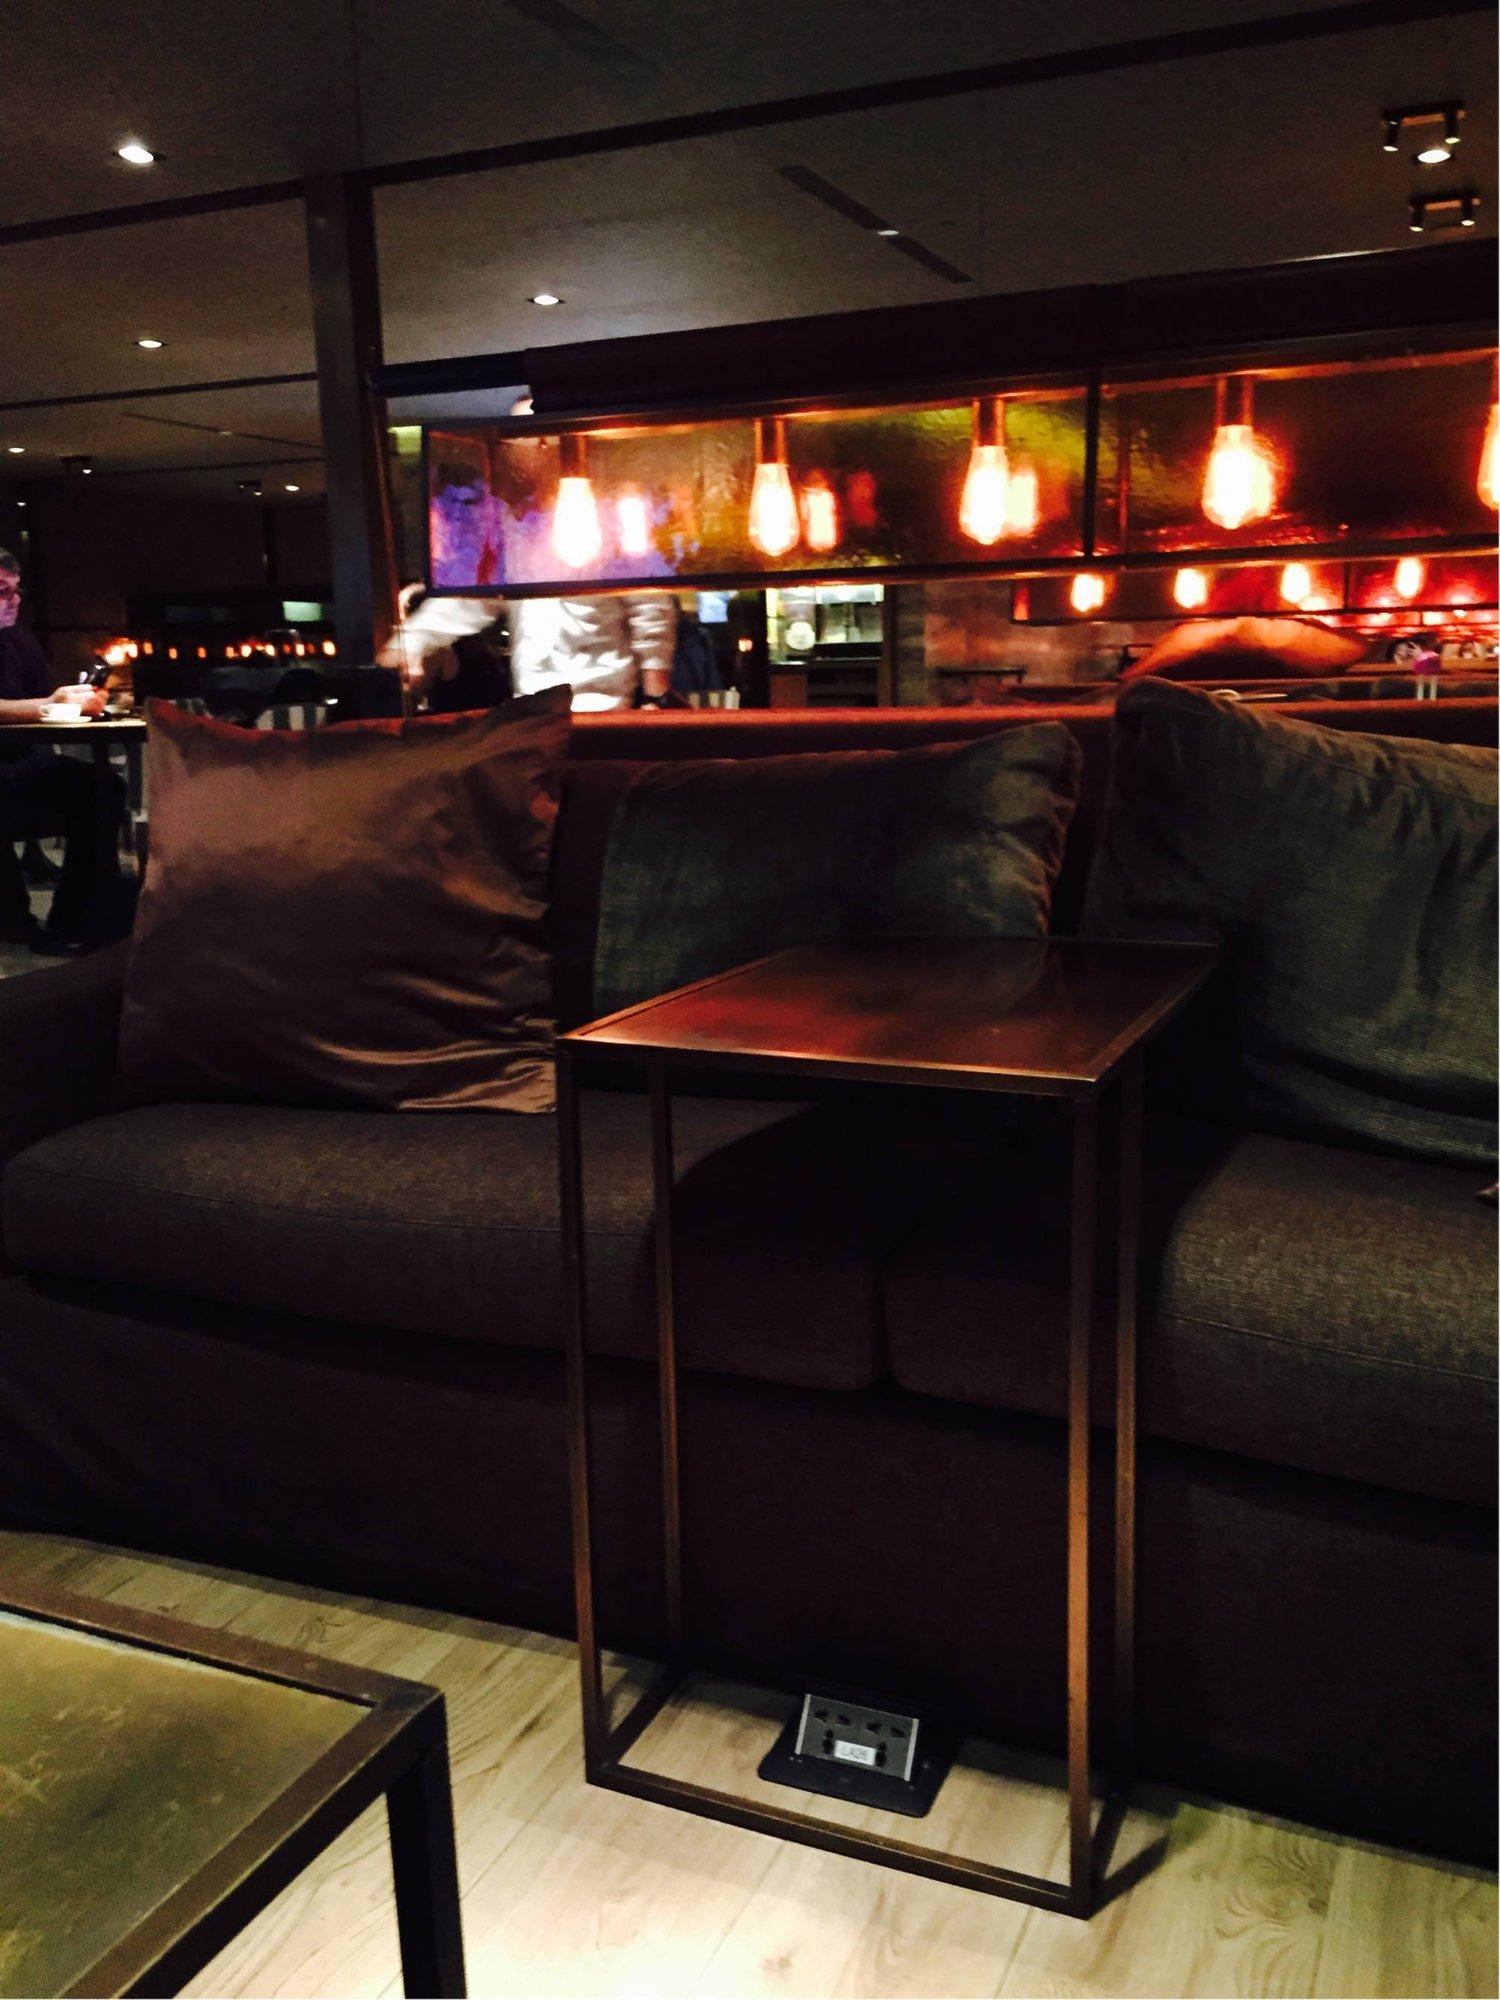 China Airlines Lounge (V1) image 30 of 44